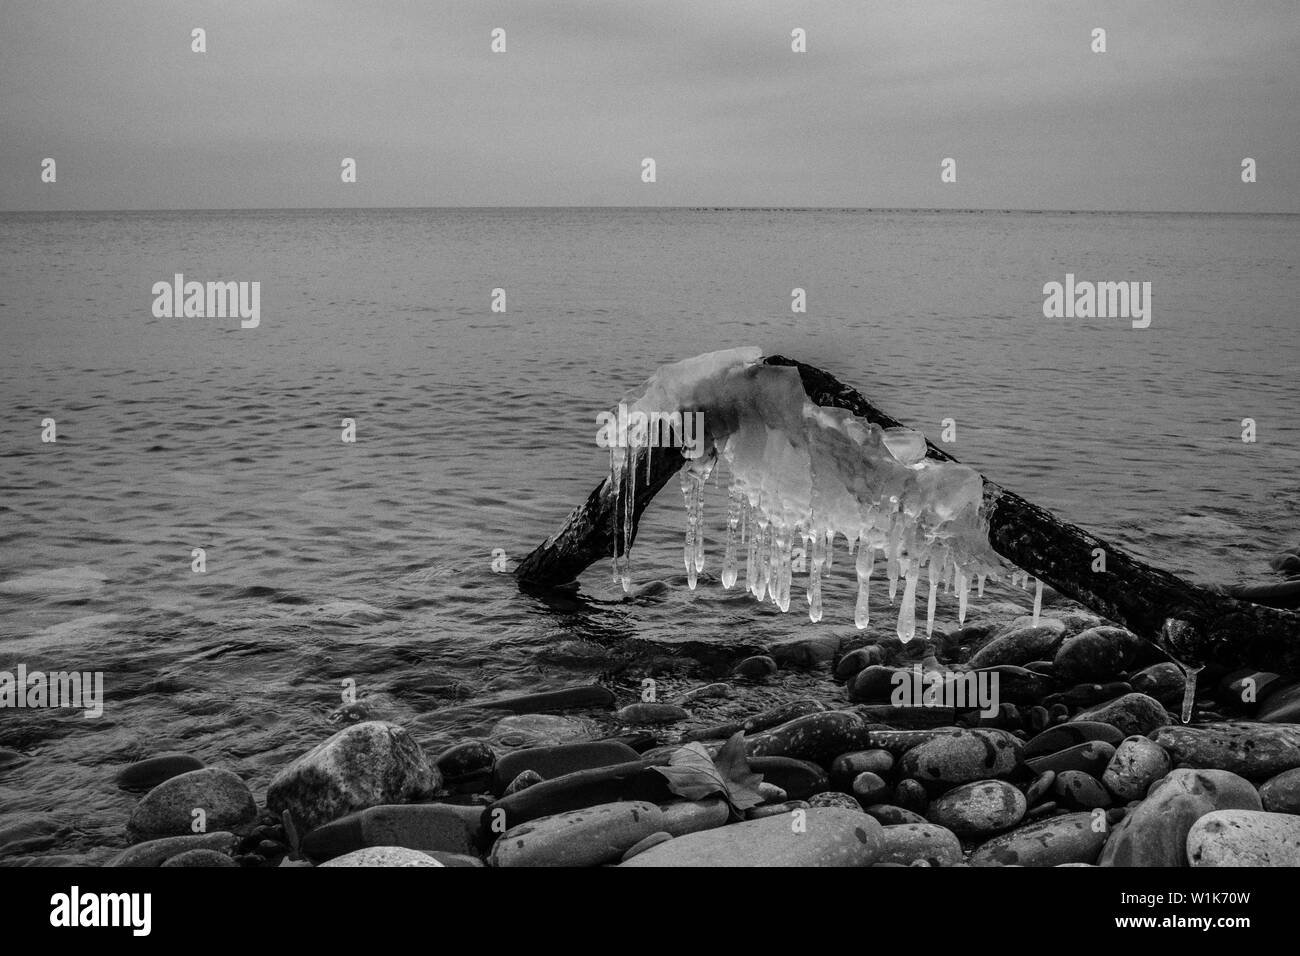 The icicles are a dead giveaway that this in not a balmy day at the beach.  It's beautiful, but not so warm. Stock Photo